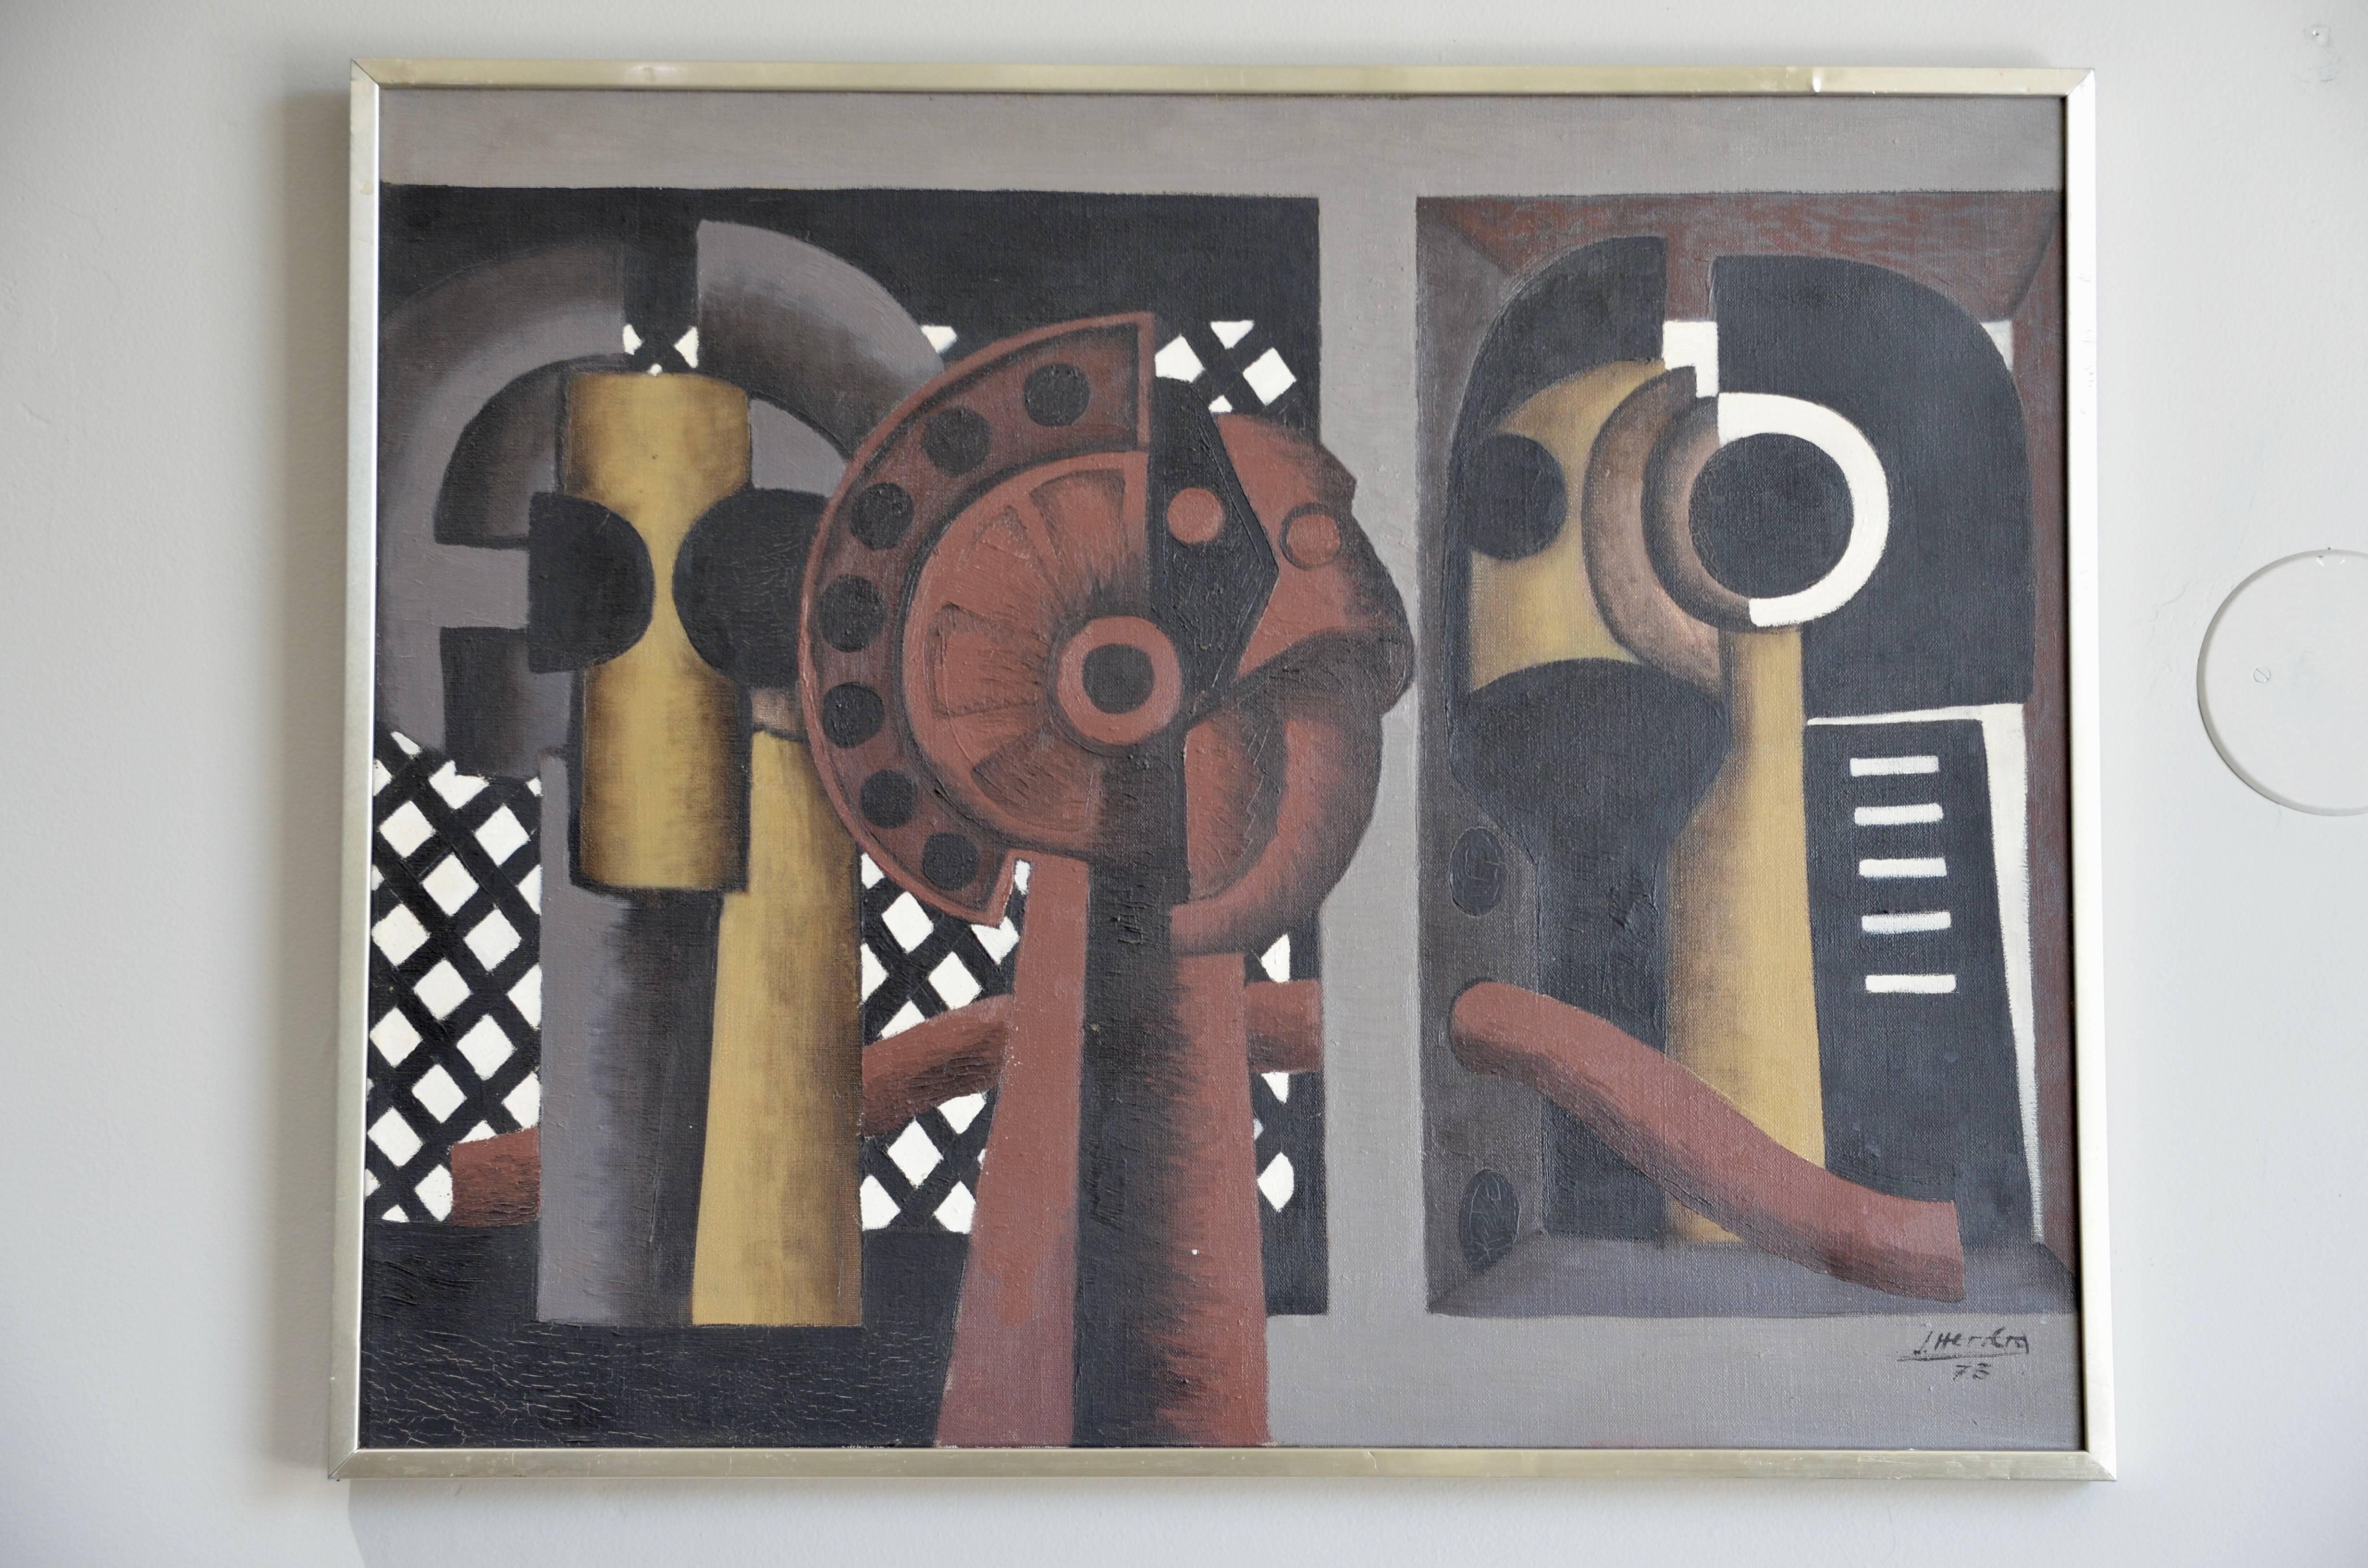 Oil on Canvas by José Herrera (Spanish, 1943-).

Signed and dated 1973.

Original stainless steel frame.

A beautiful piece.